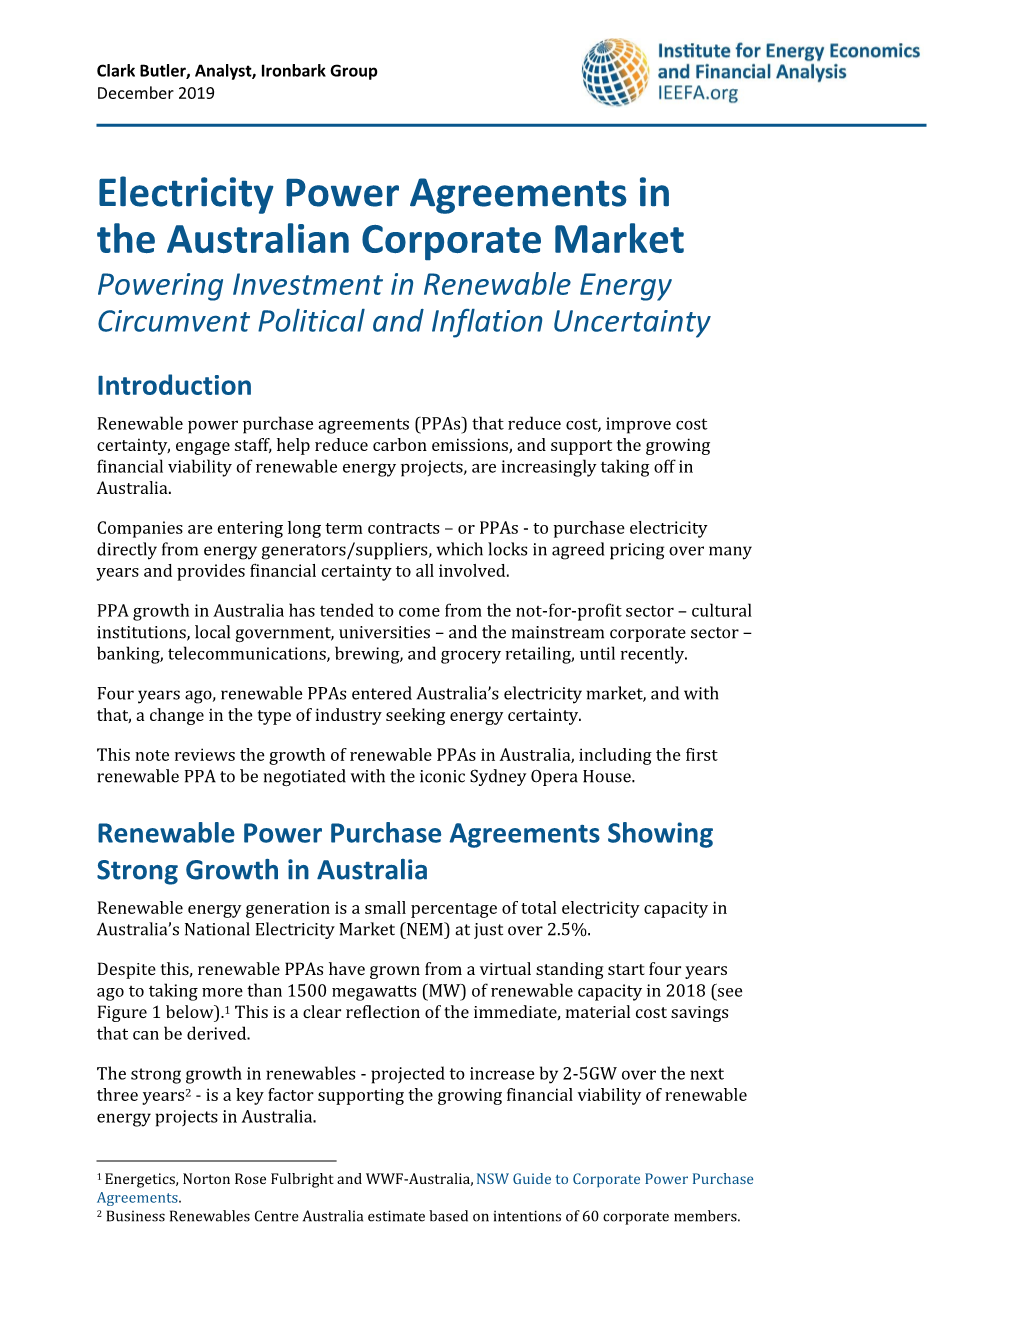 Electricity Power Agreements in the Australian Corporate Market Powering Investment in Renewable Energy Circumvent Political and Inflation Uncertainty